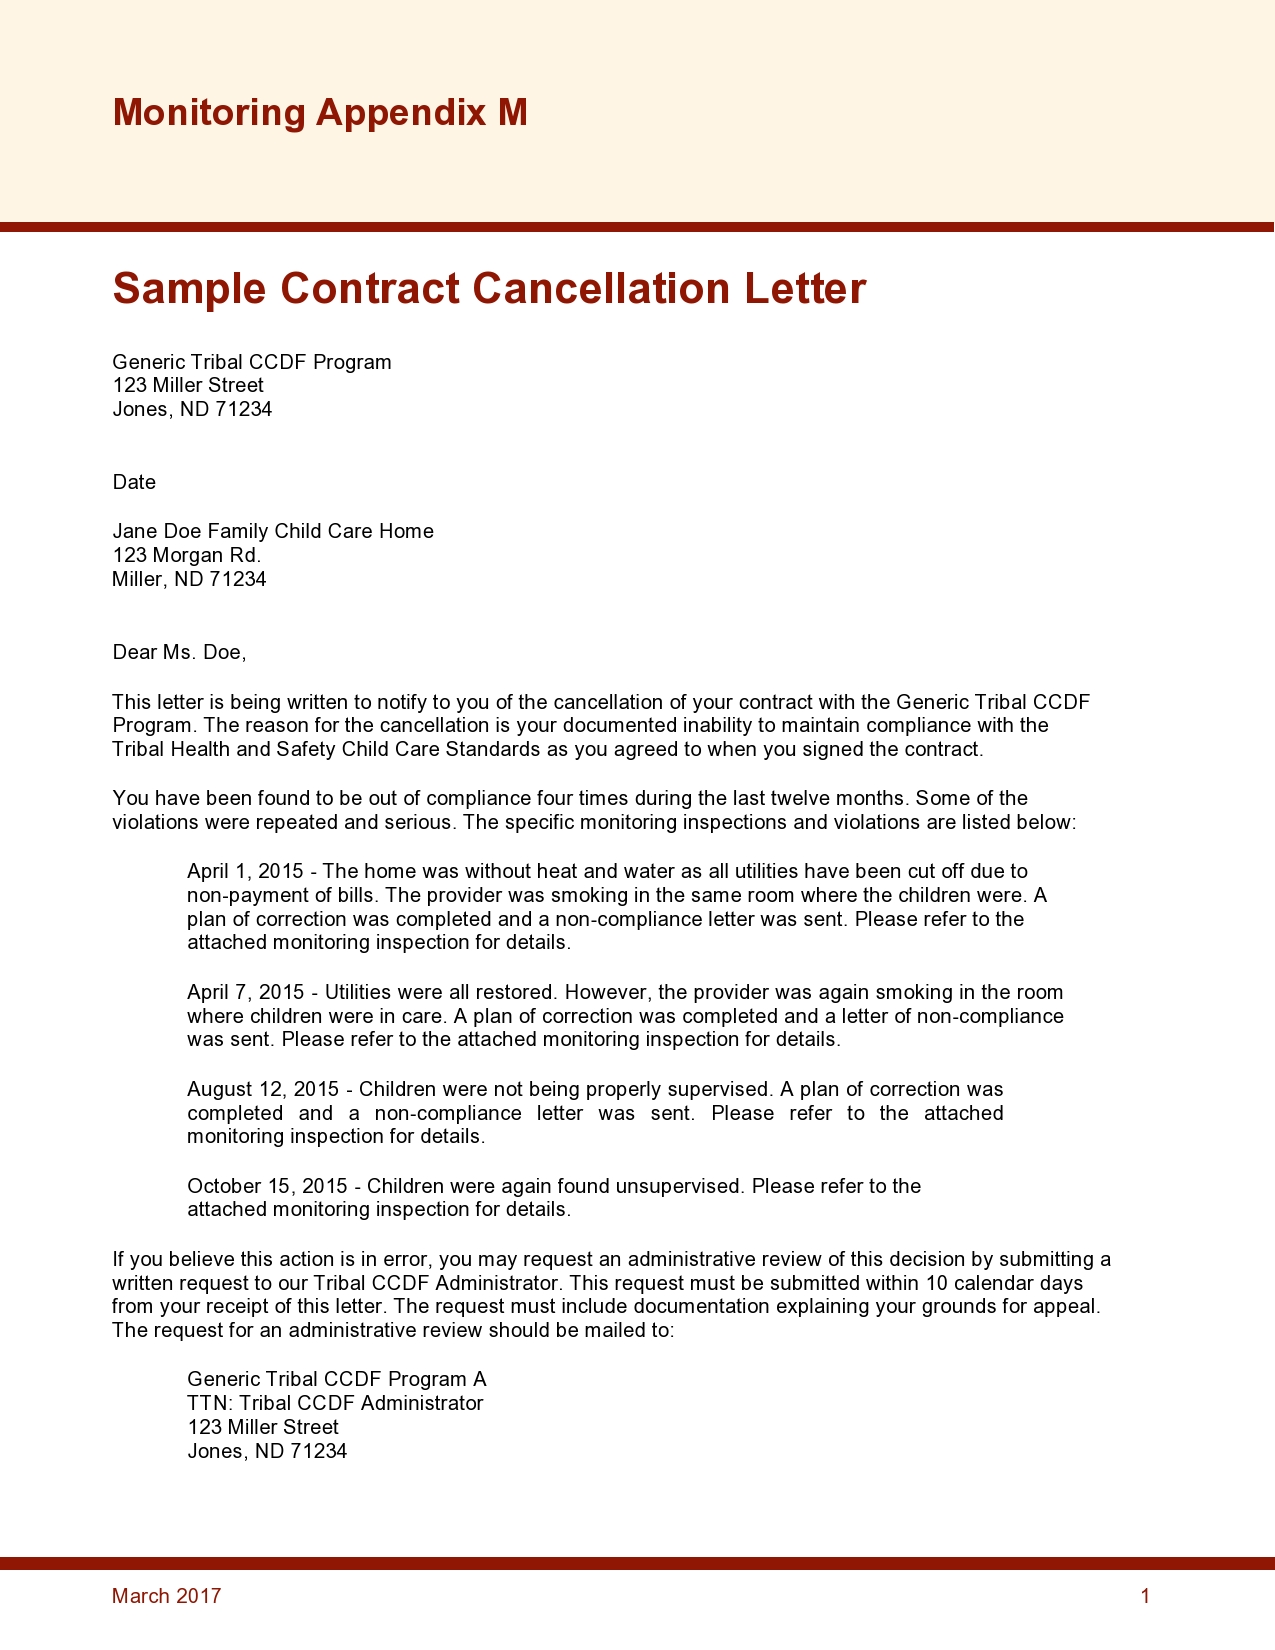 Free contract termination letter 25